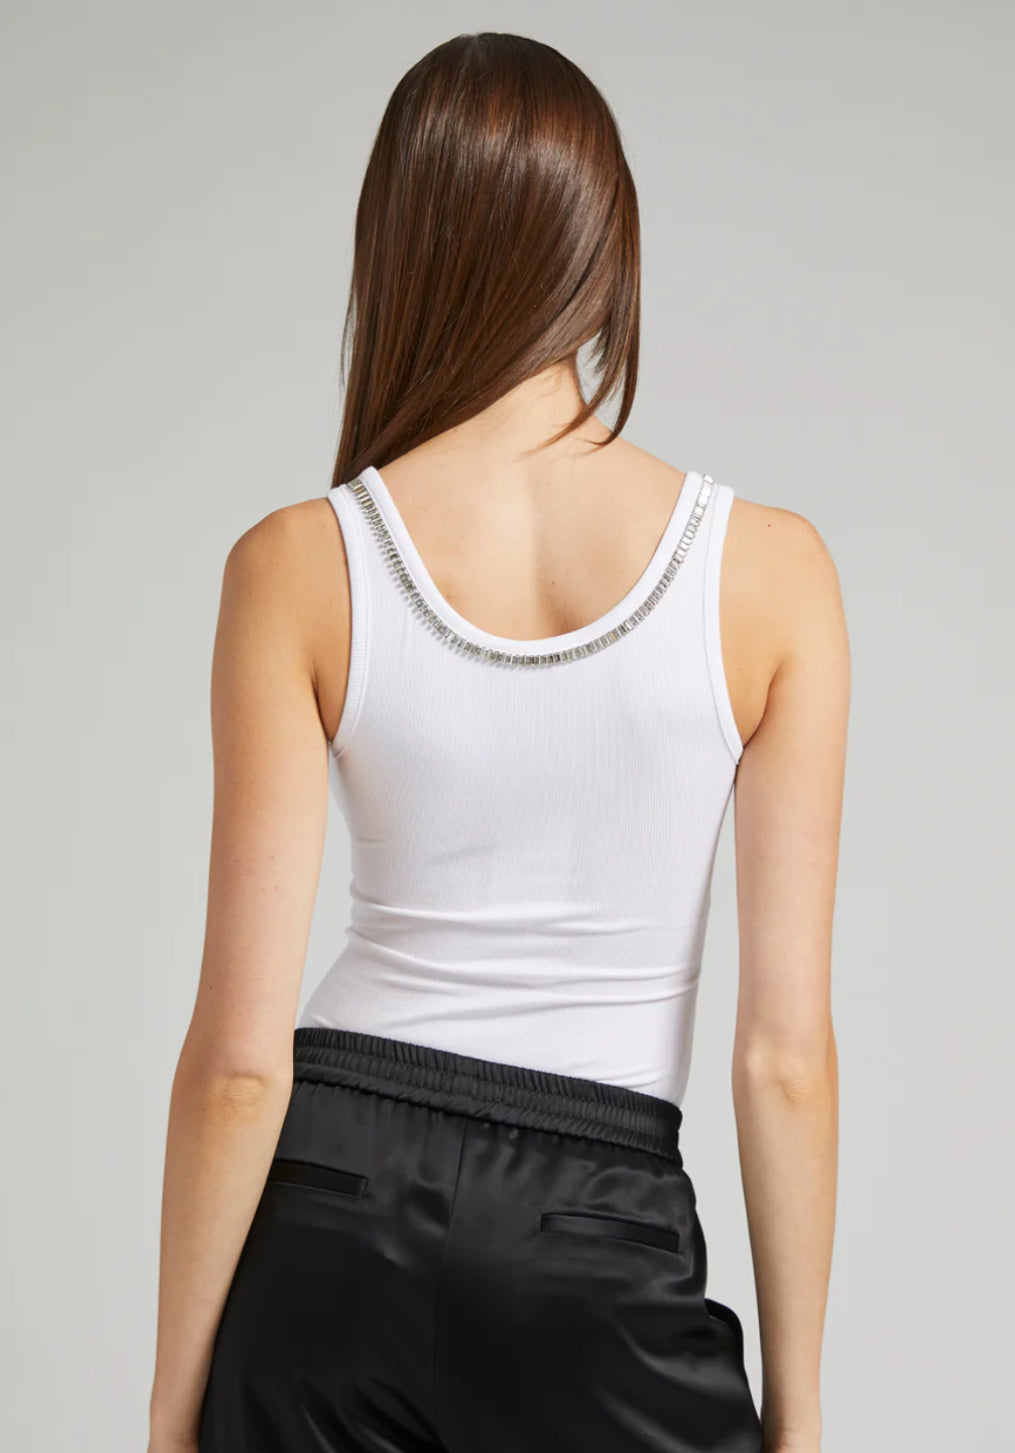 Generation Love Ziggy Crystal Trim Tank in White - Size S Available